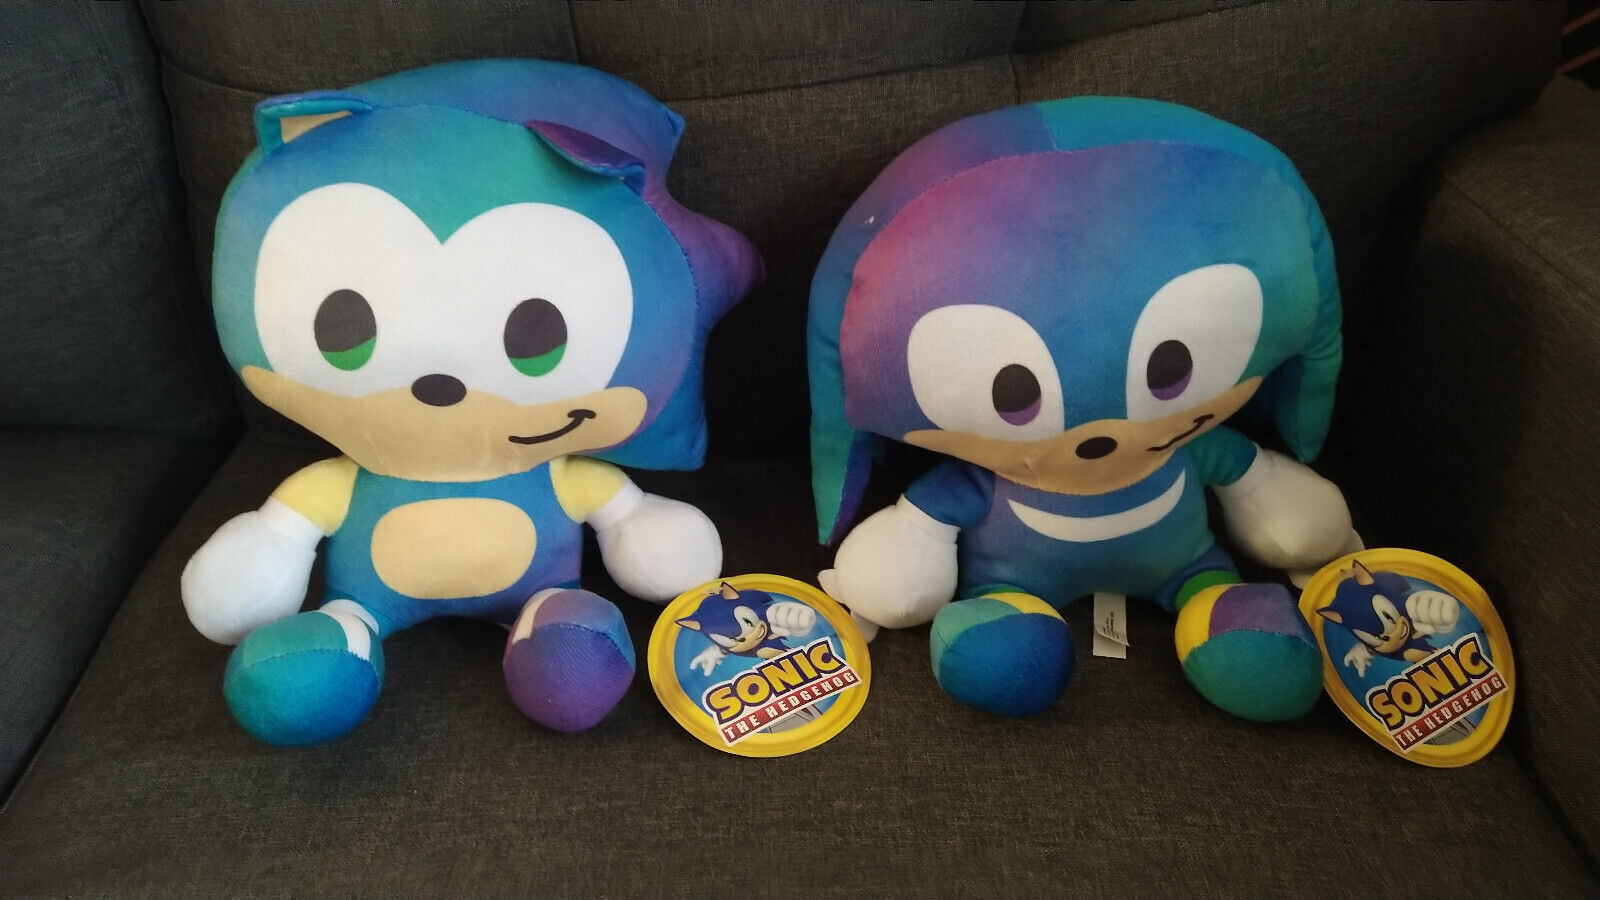 Sega Sonic and Knuckles Gradient Big Head Plush 10” Limited Edition Toy Factory